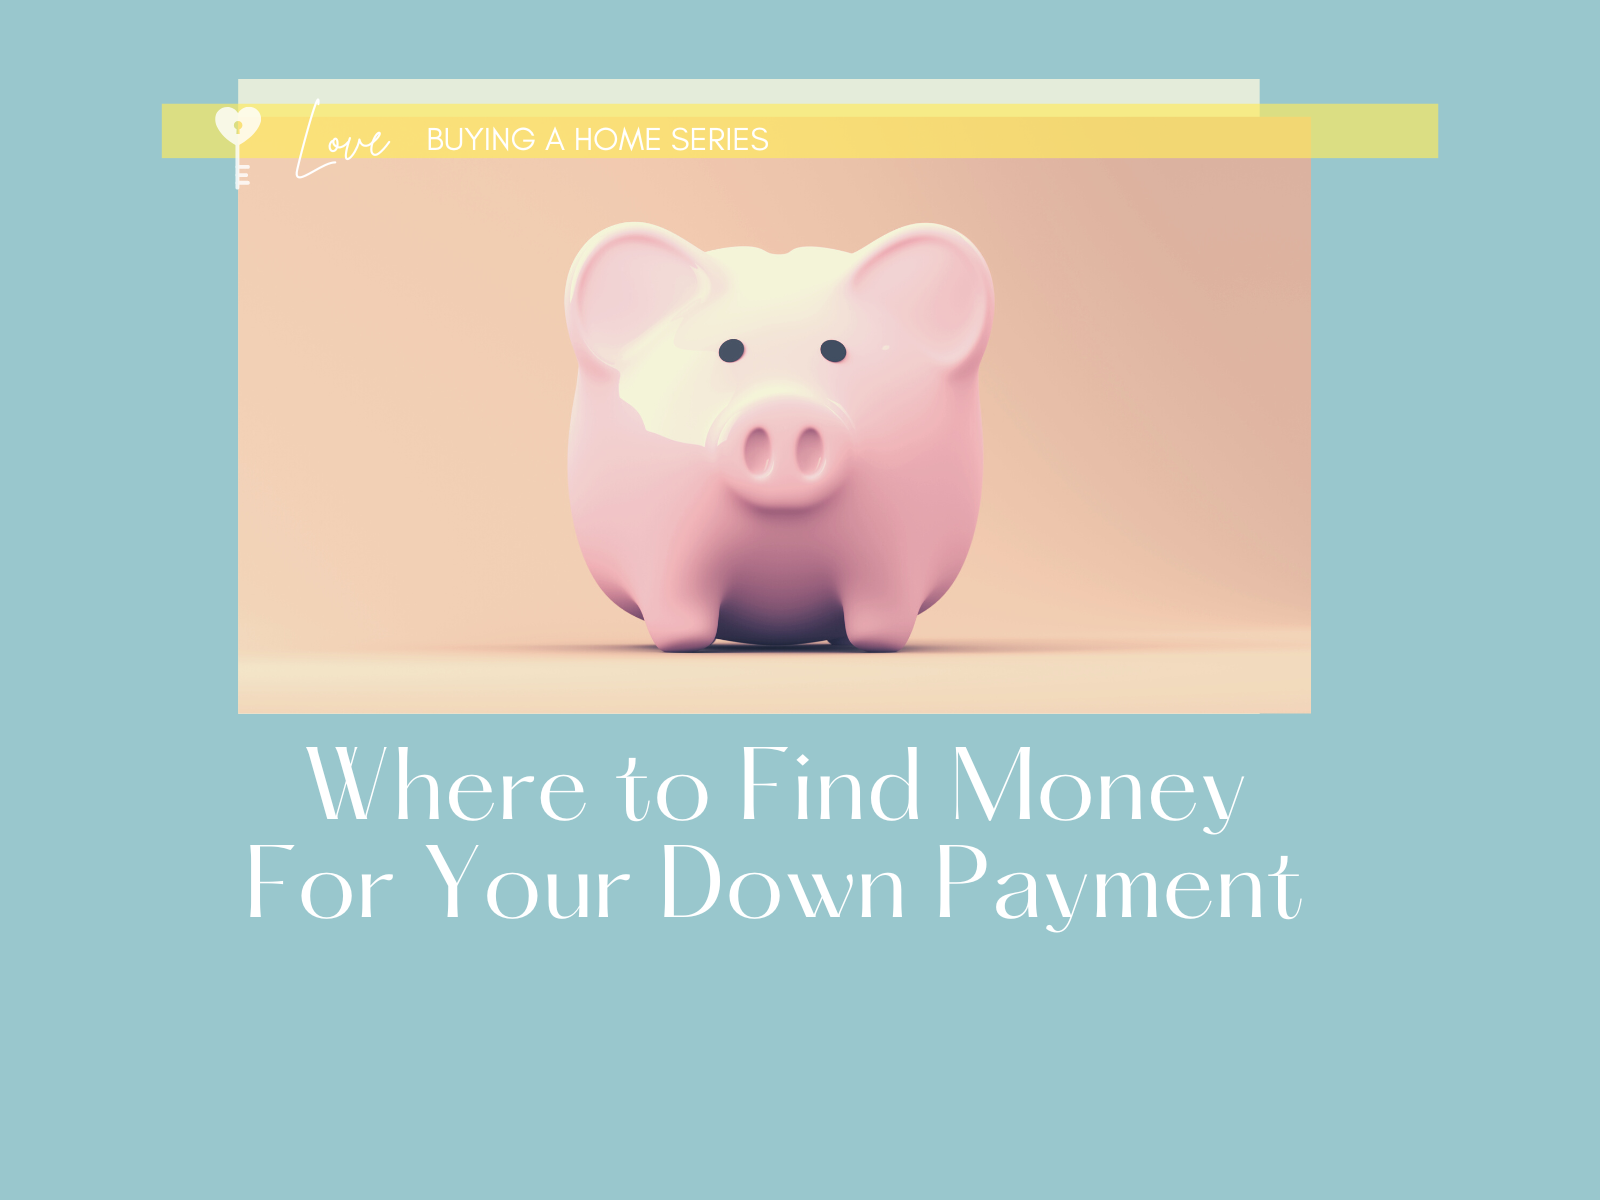 Where to Find Money for Your Down Payment